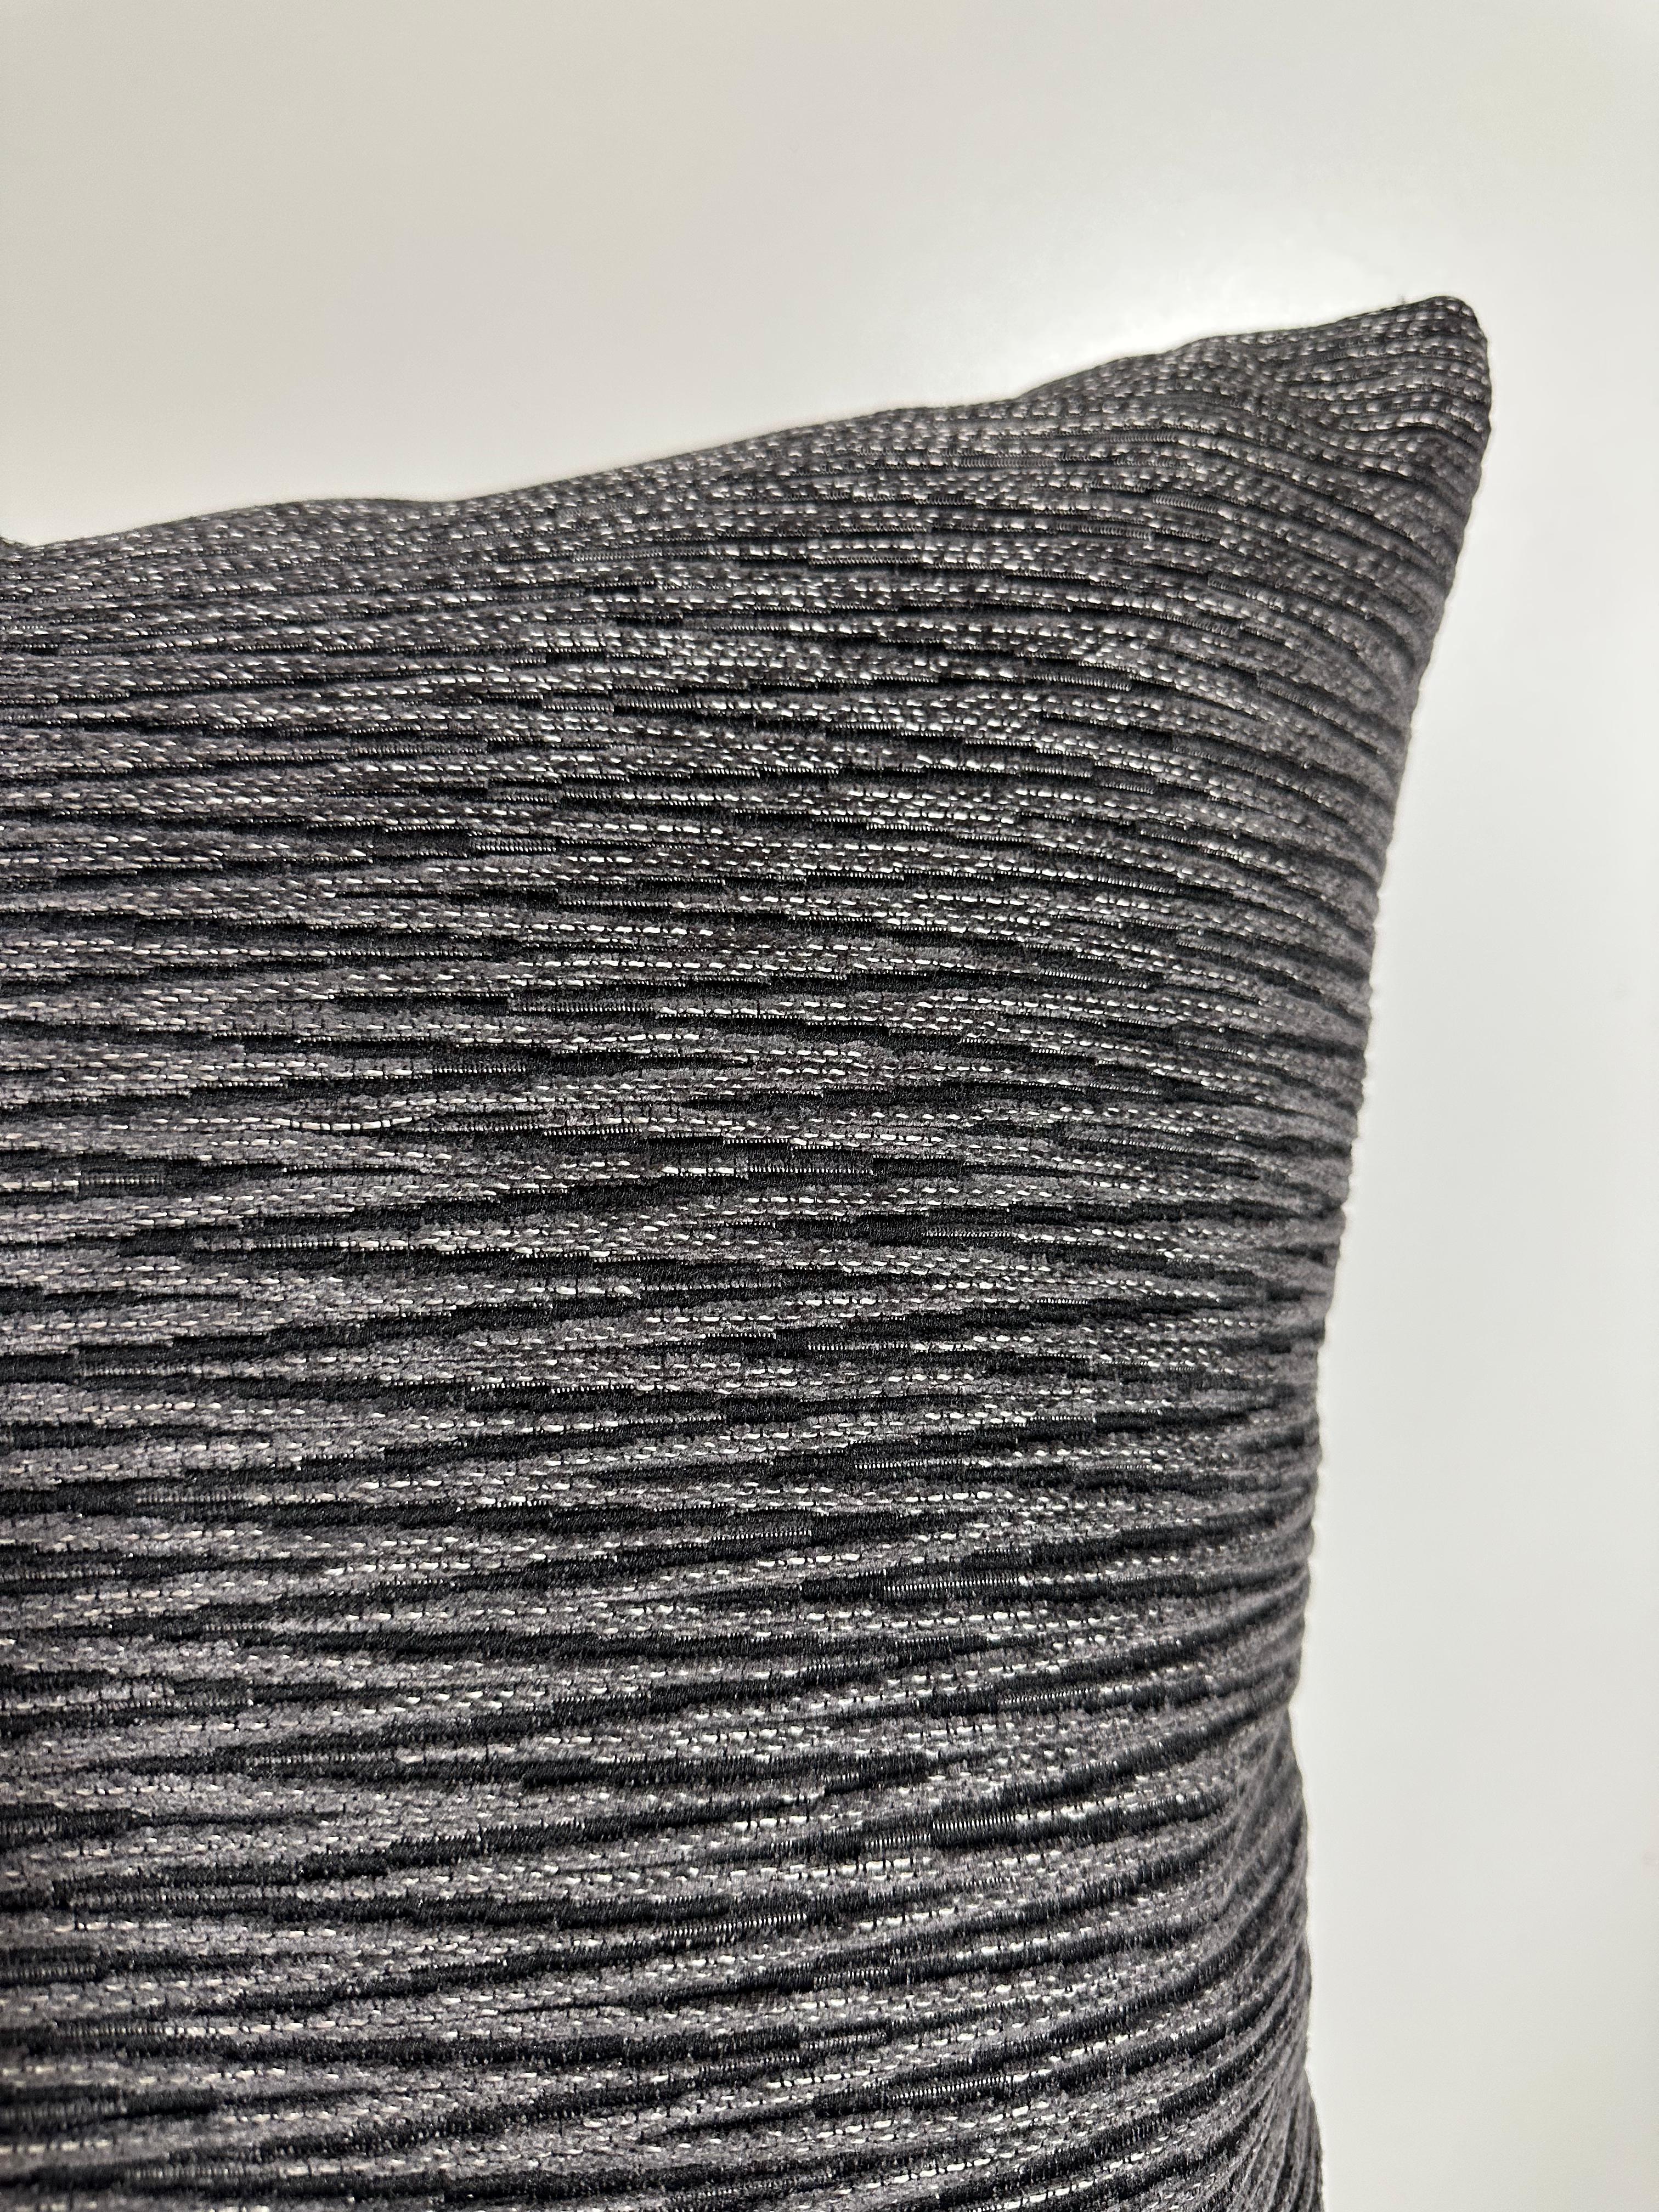 American Chevron Charcoal- Black & Gray throw pillow in imported fabrics by Mar de Doce